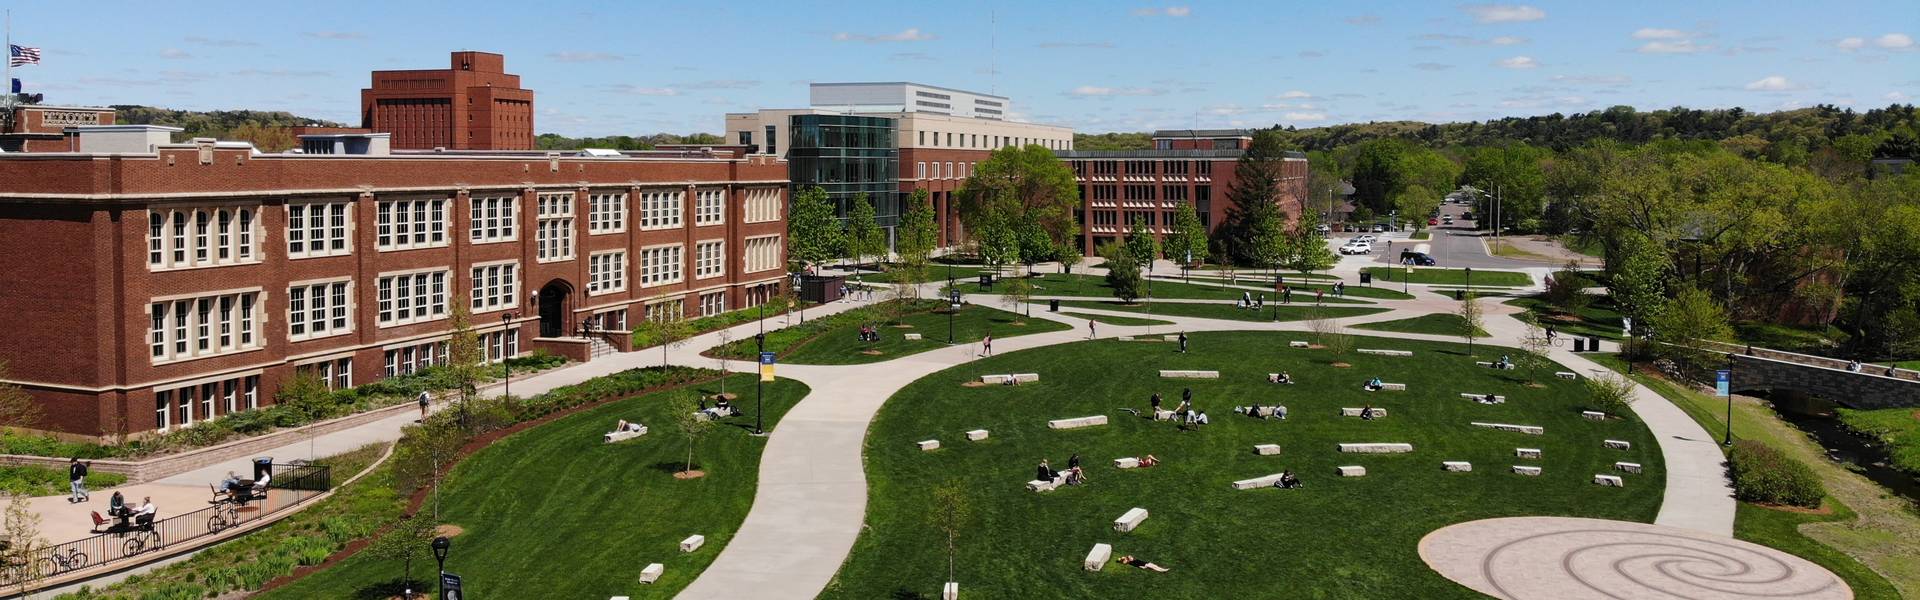 UW-Eau Claire campus mall May 2019